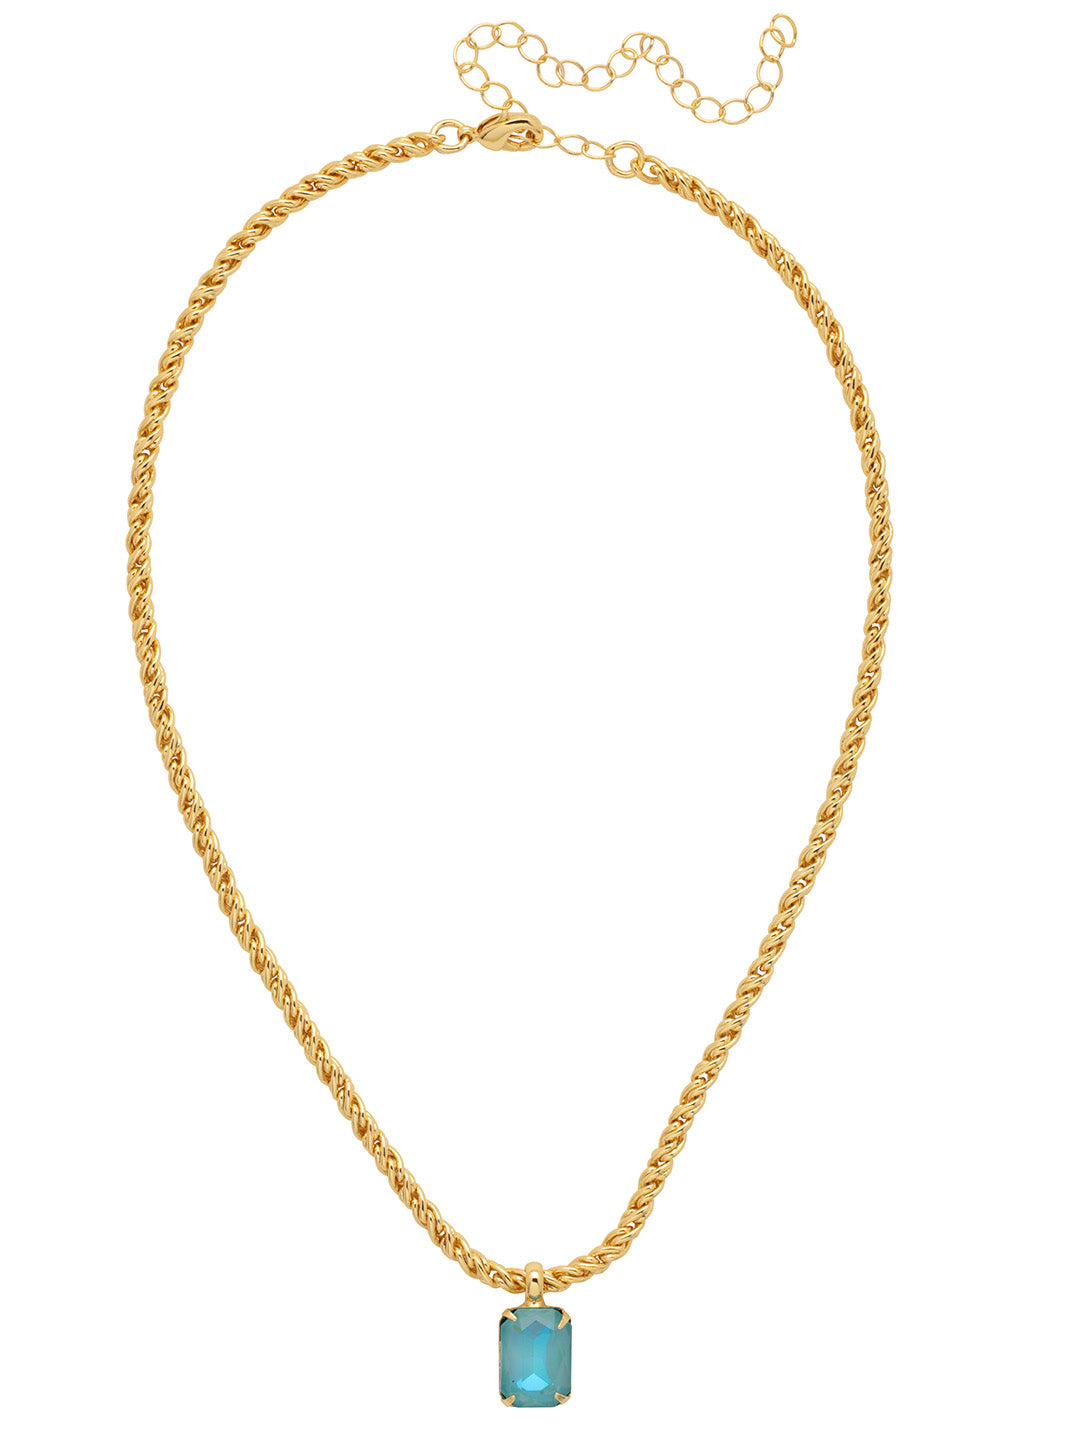 Emerald Rope Chain Pendant Necklace - NCT110BGSBD - <p>The Emerald Rope Chain Pendant Necklace features an emerald cut pendant on an adjustable rope chain, secured by a lobster claw clasp. From Sorrelli's Summer Blue Delite collection in our Bright Gold-tone finish.</p>